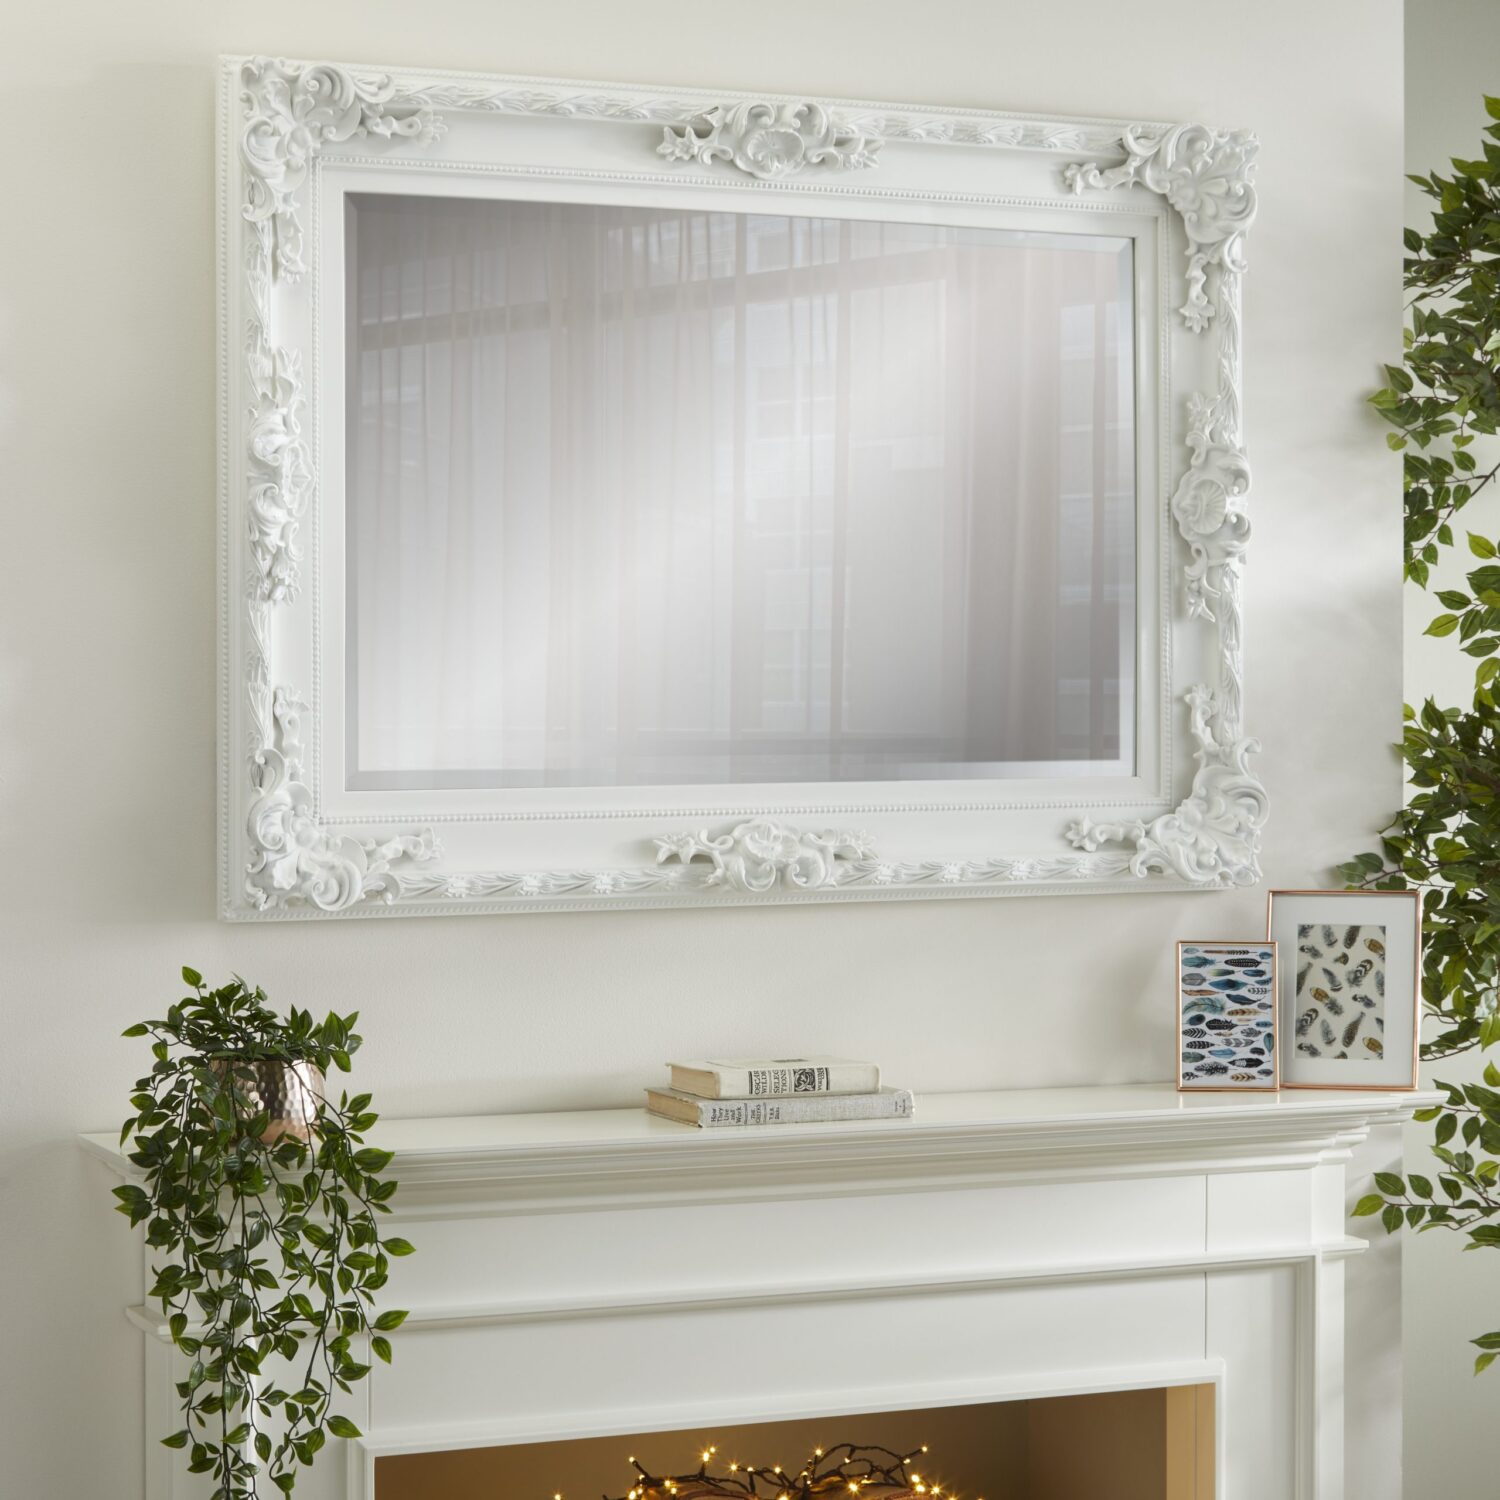 Buy Decorative Wall Mirror Online at Affordable Prices | Myntra